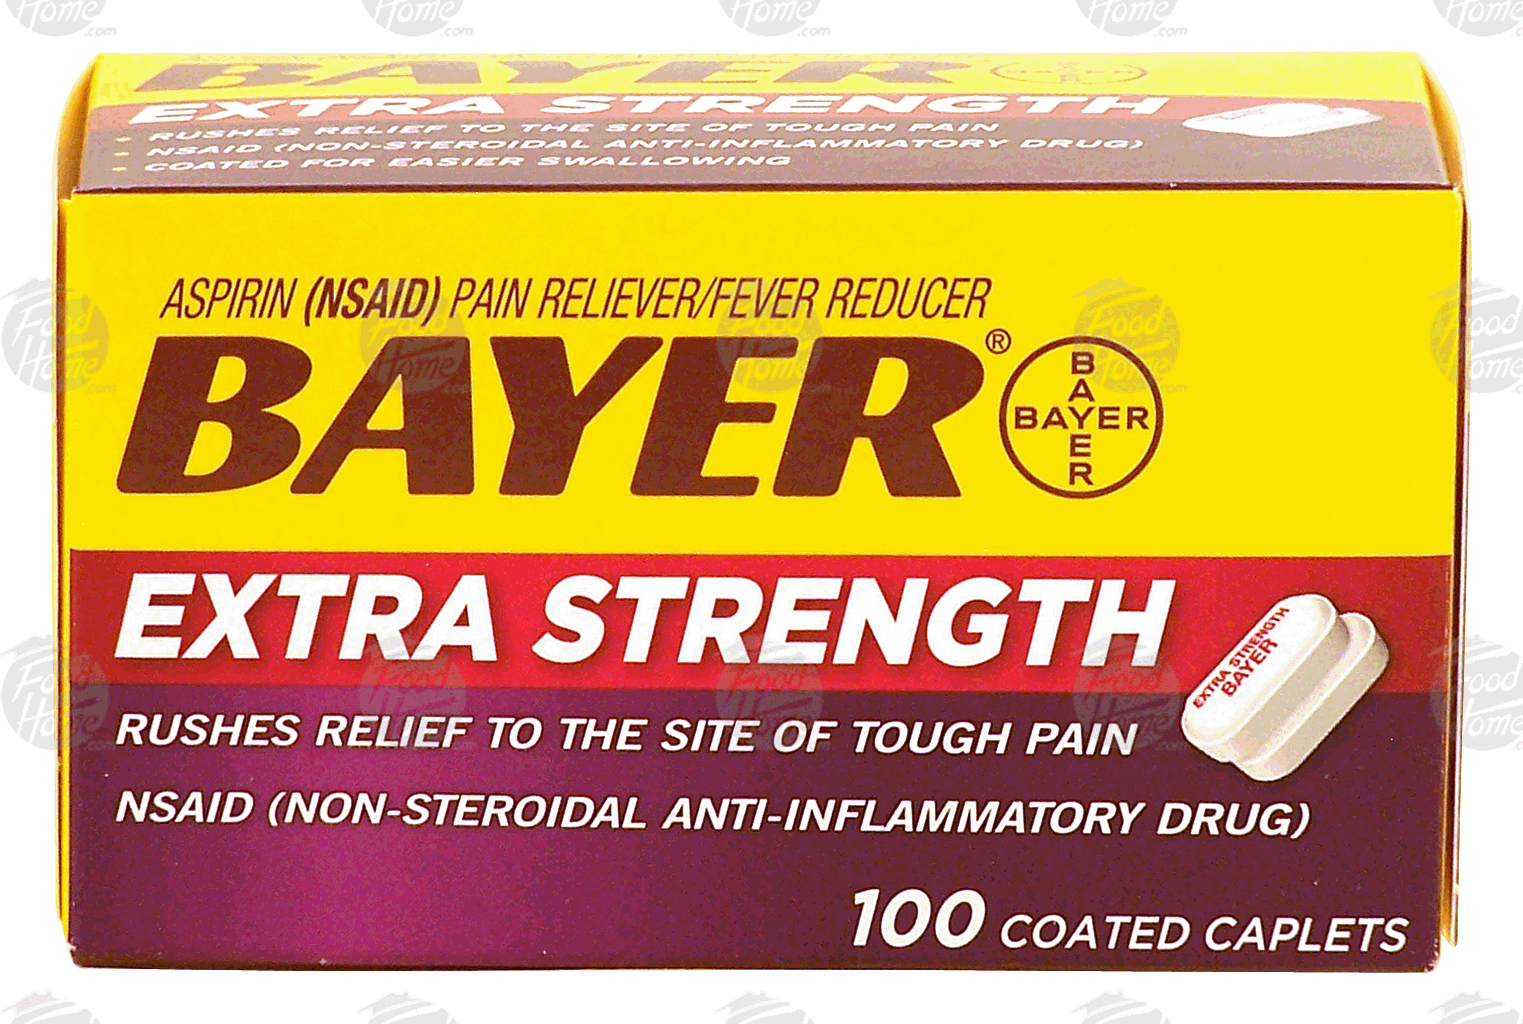 Bayer  extra strength aspirin, pain reliever/ fever reducer, 100 coated caplets Full-Size Picture